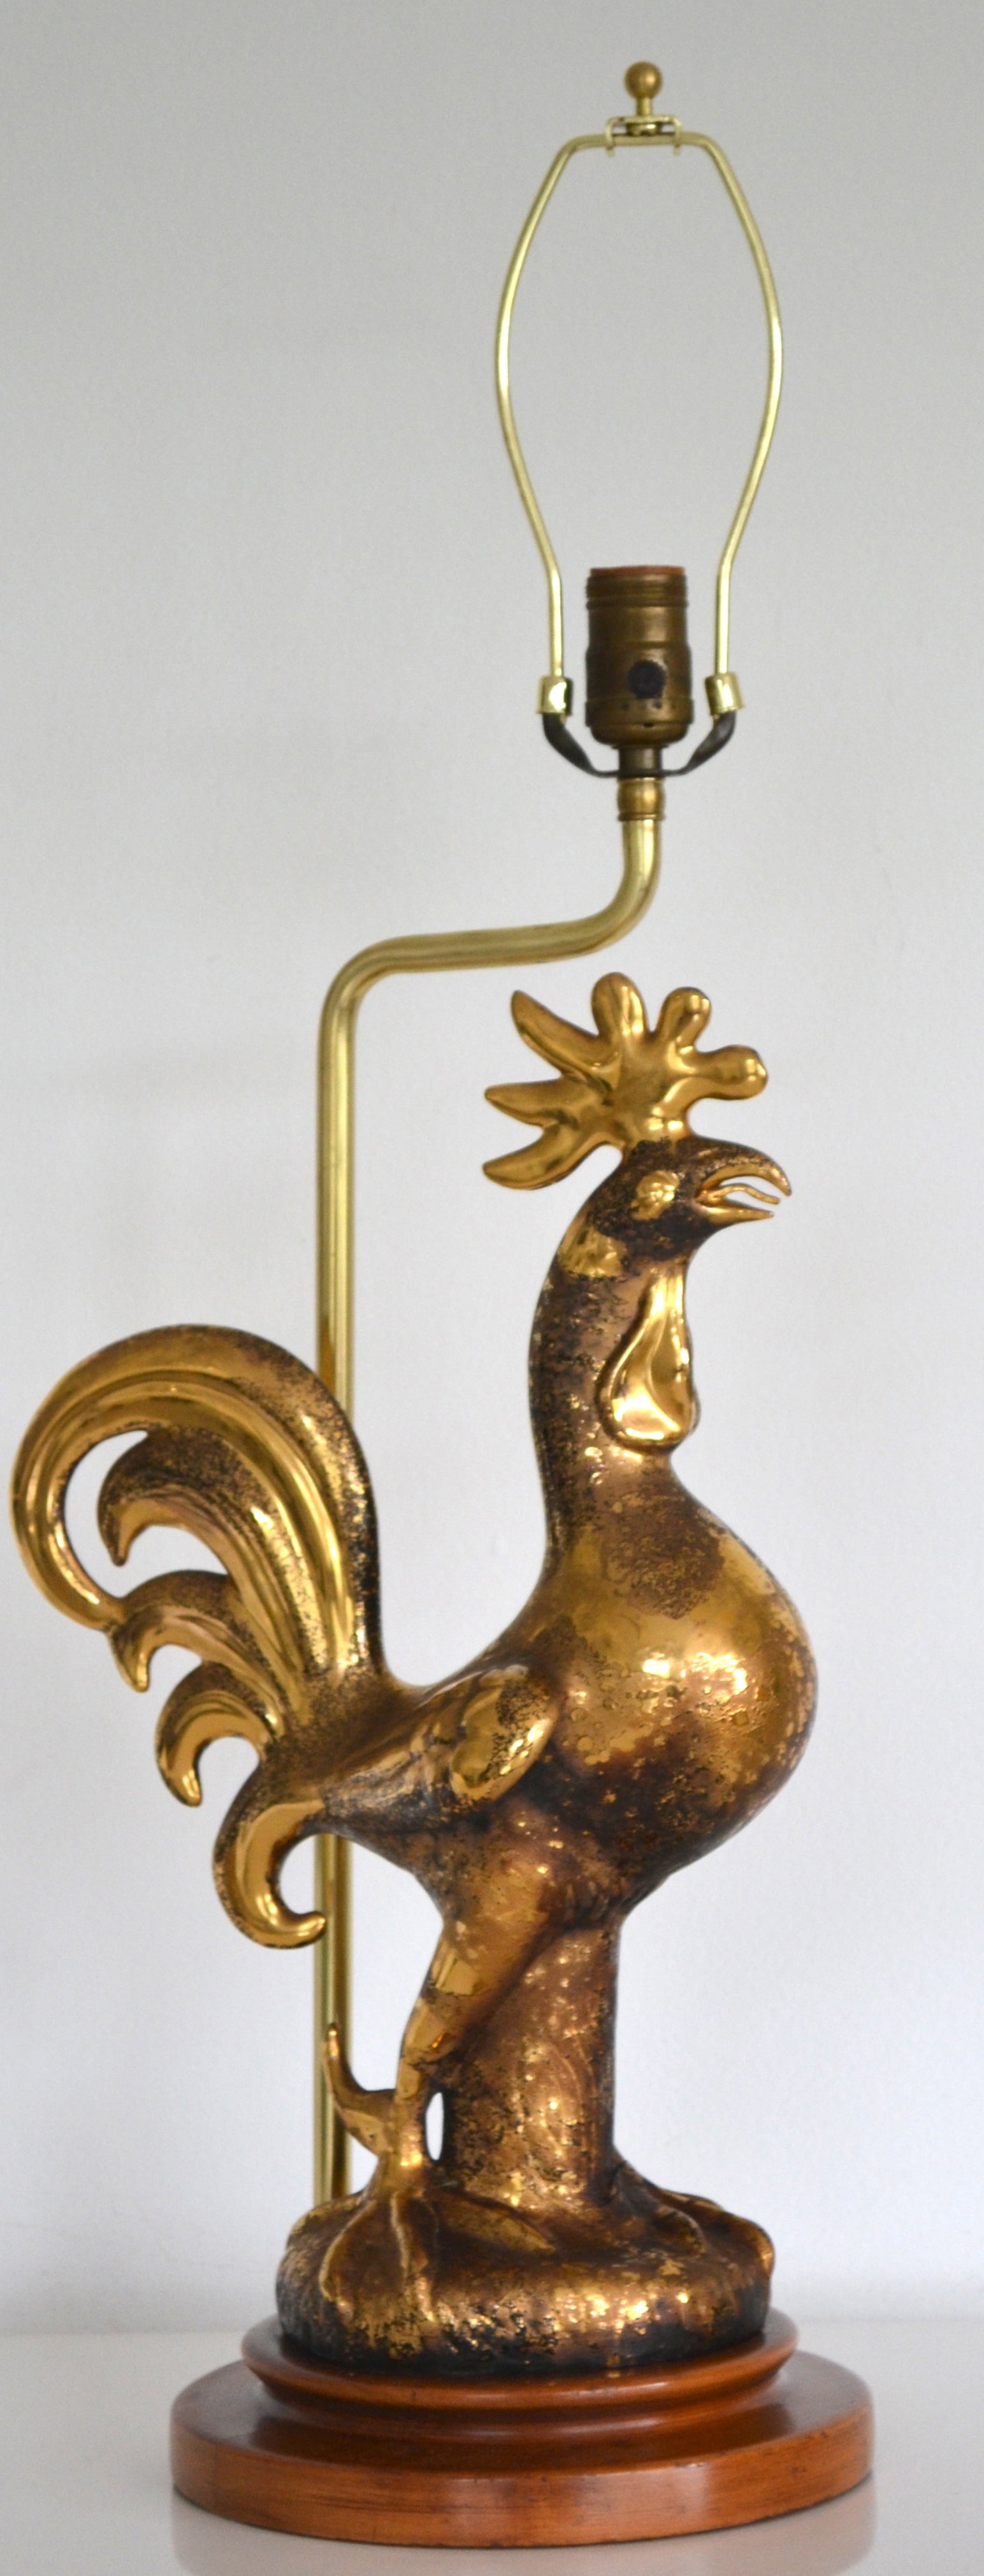 Hollywood Regency Style Rooster Form Table Lamp by Sascha Brastoff